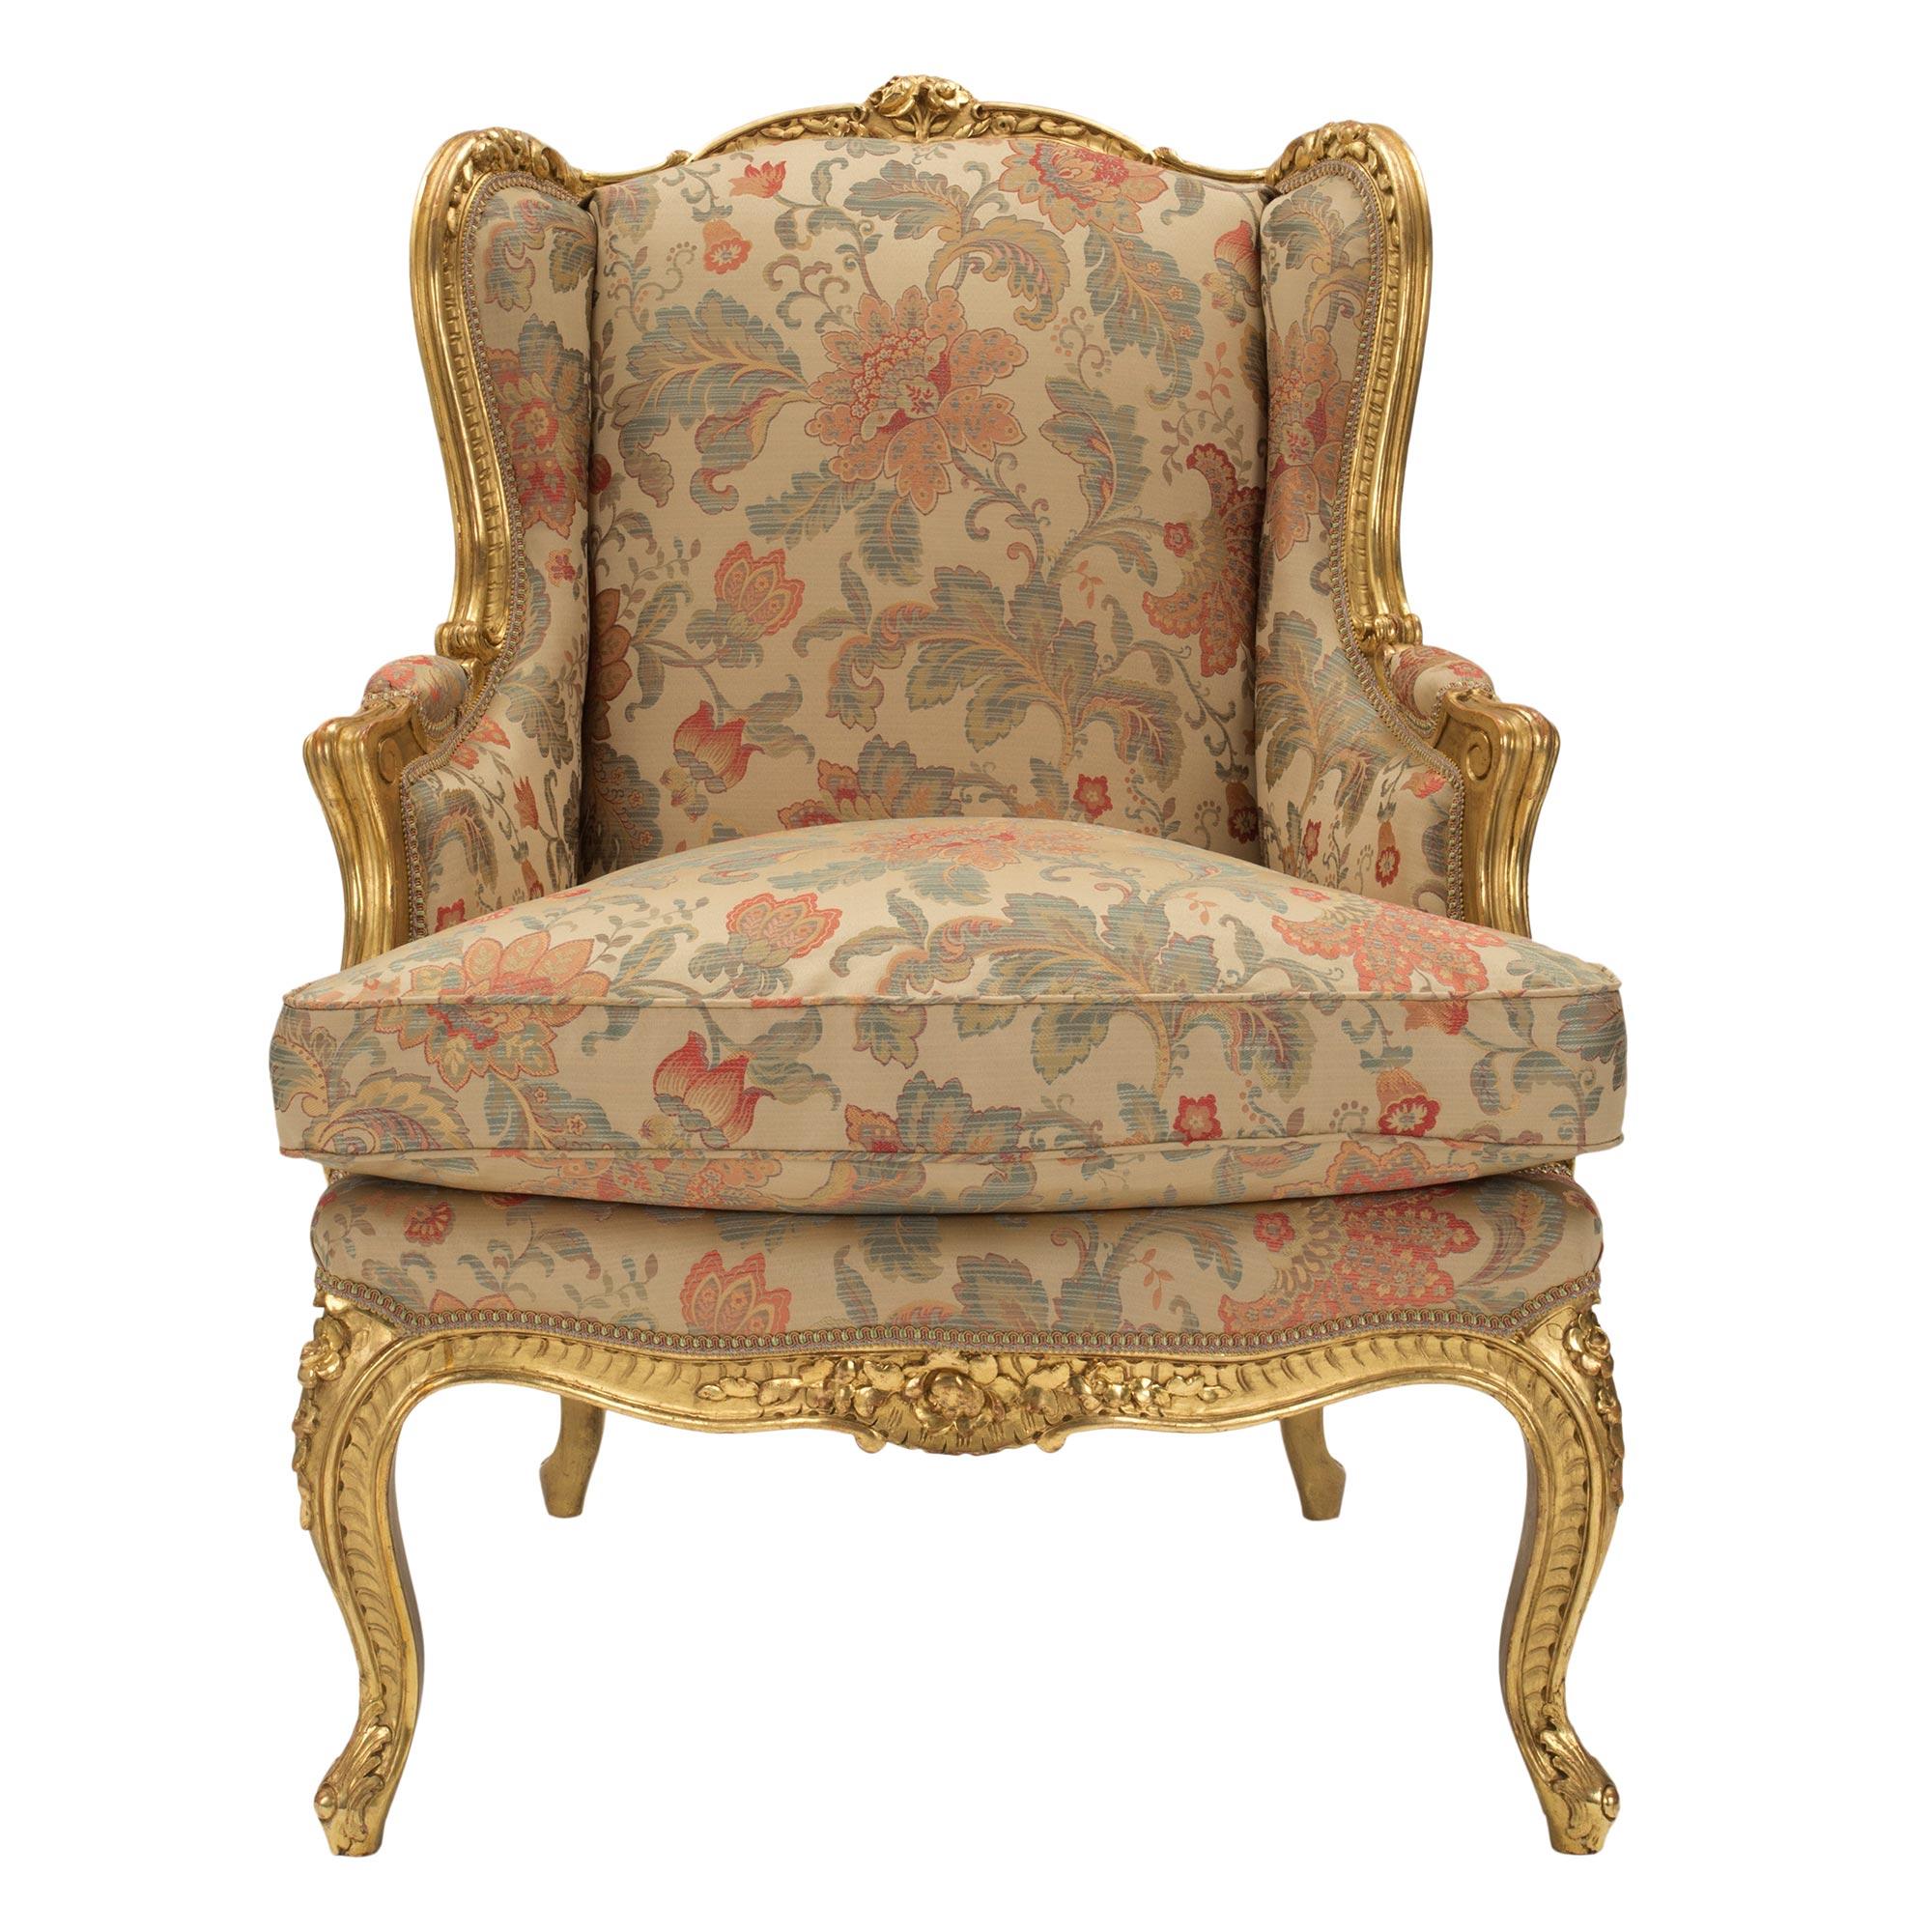 An exceptional pair of French 19th century Louis XV st. giltwood bergères a oreilles. Each armchair is raised by beautiful cabriole legs with fine acanthus leaf feet and a unique and most decorative carved pattern which extends along the arbalest